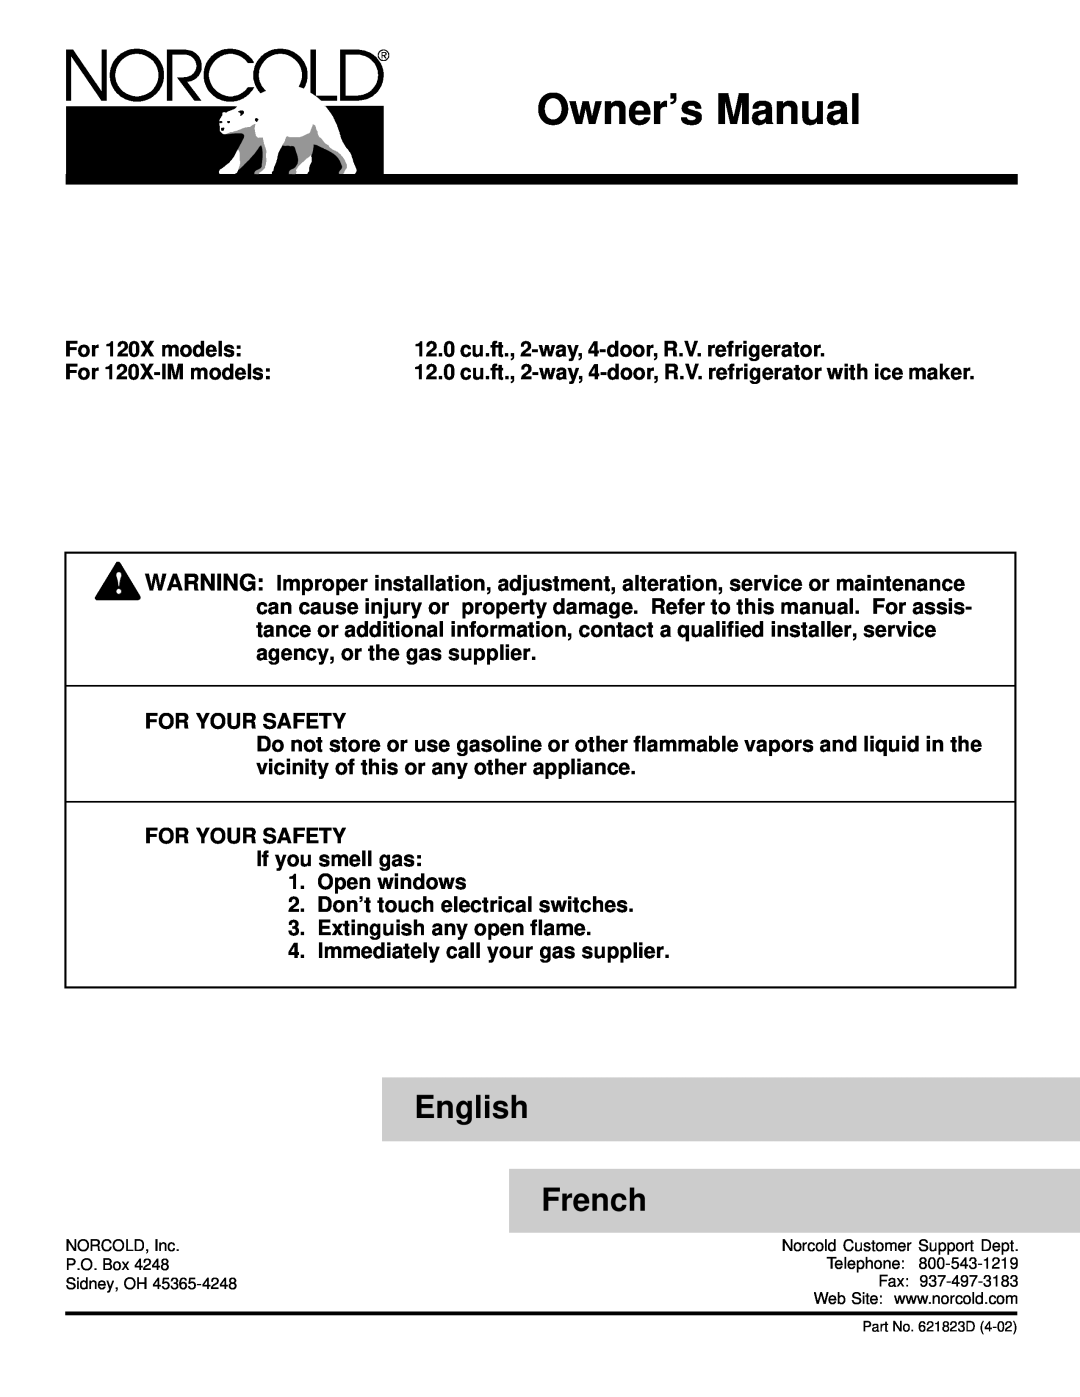 Norcold 120x owner manual English, French 